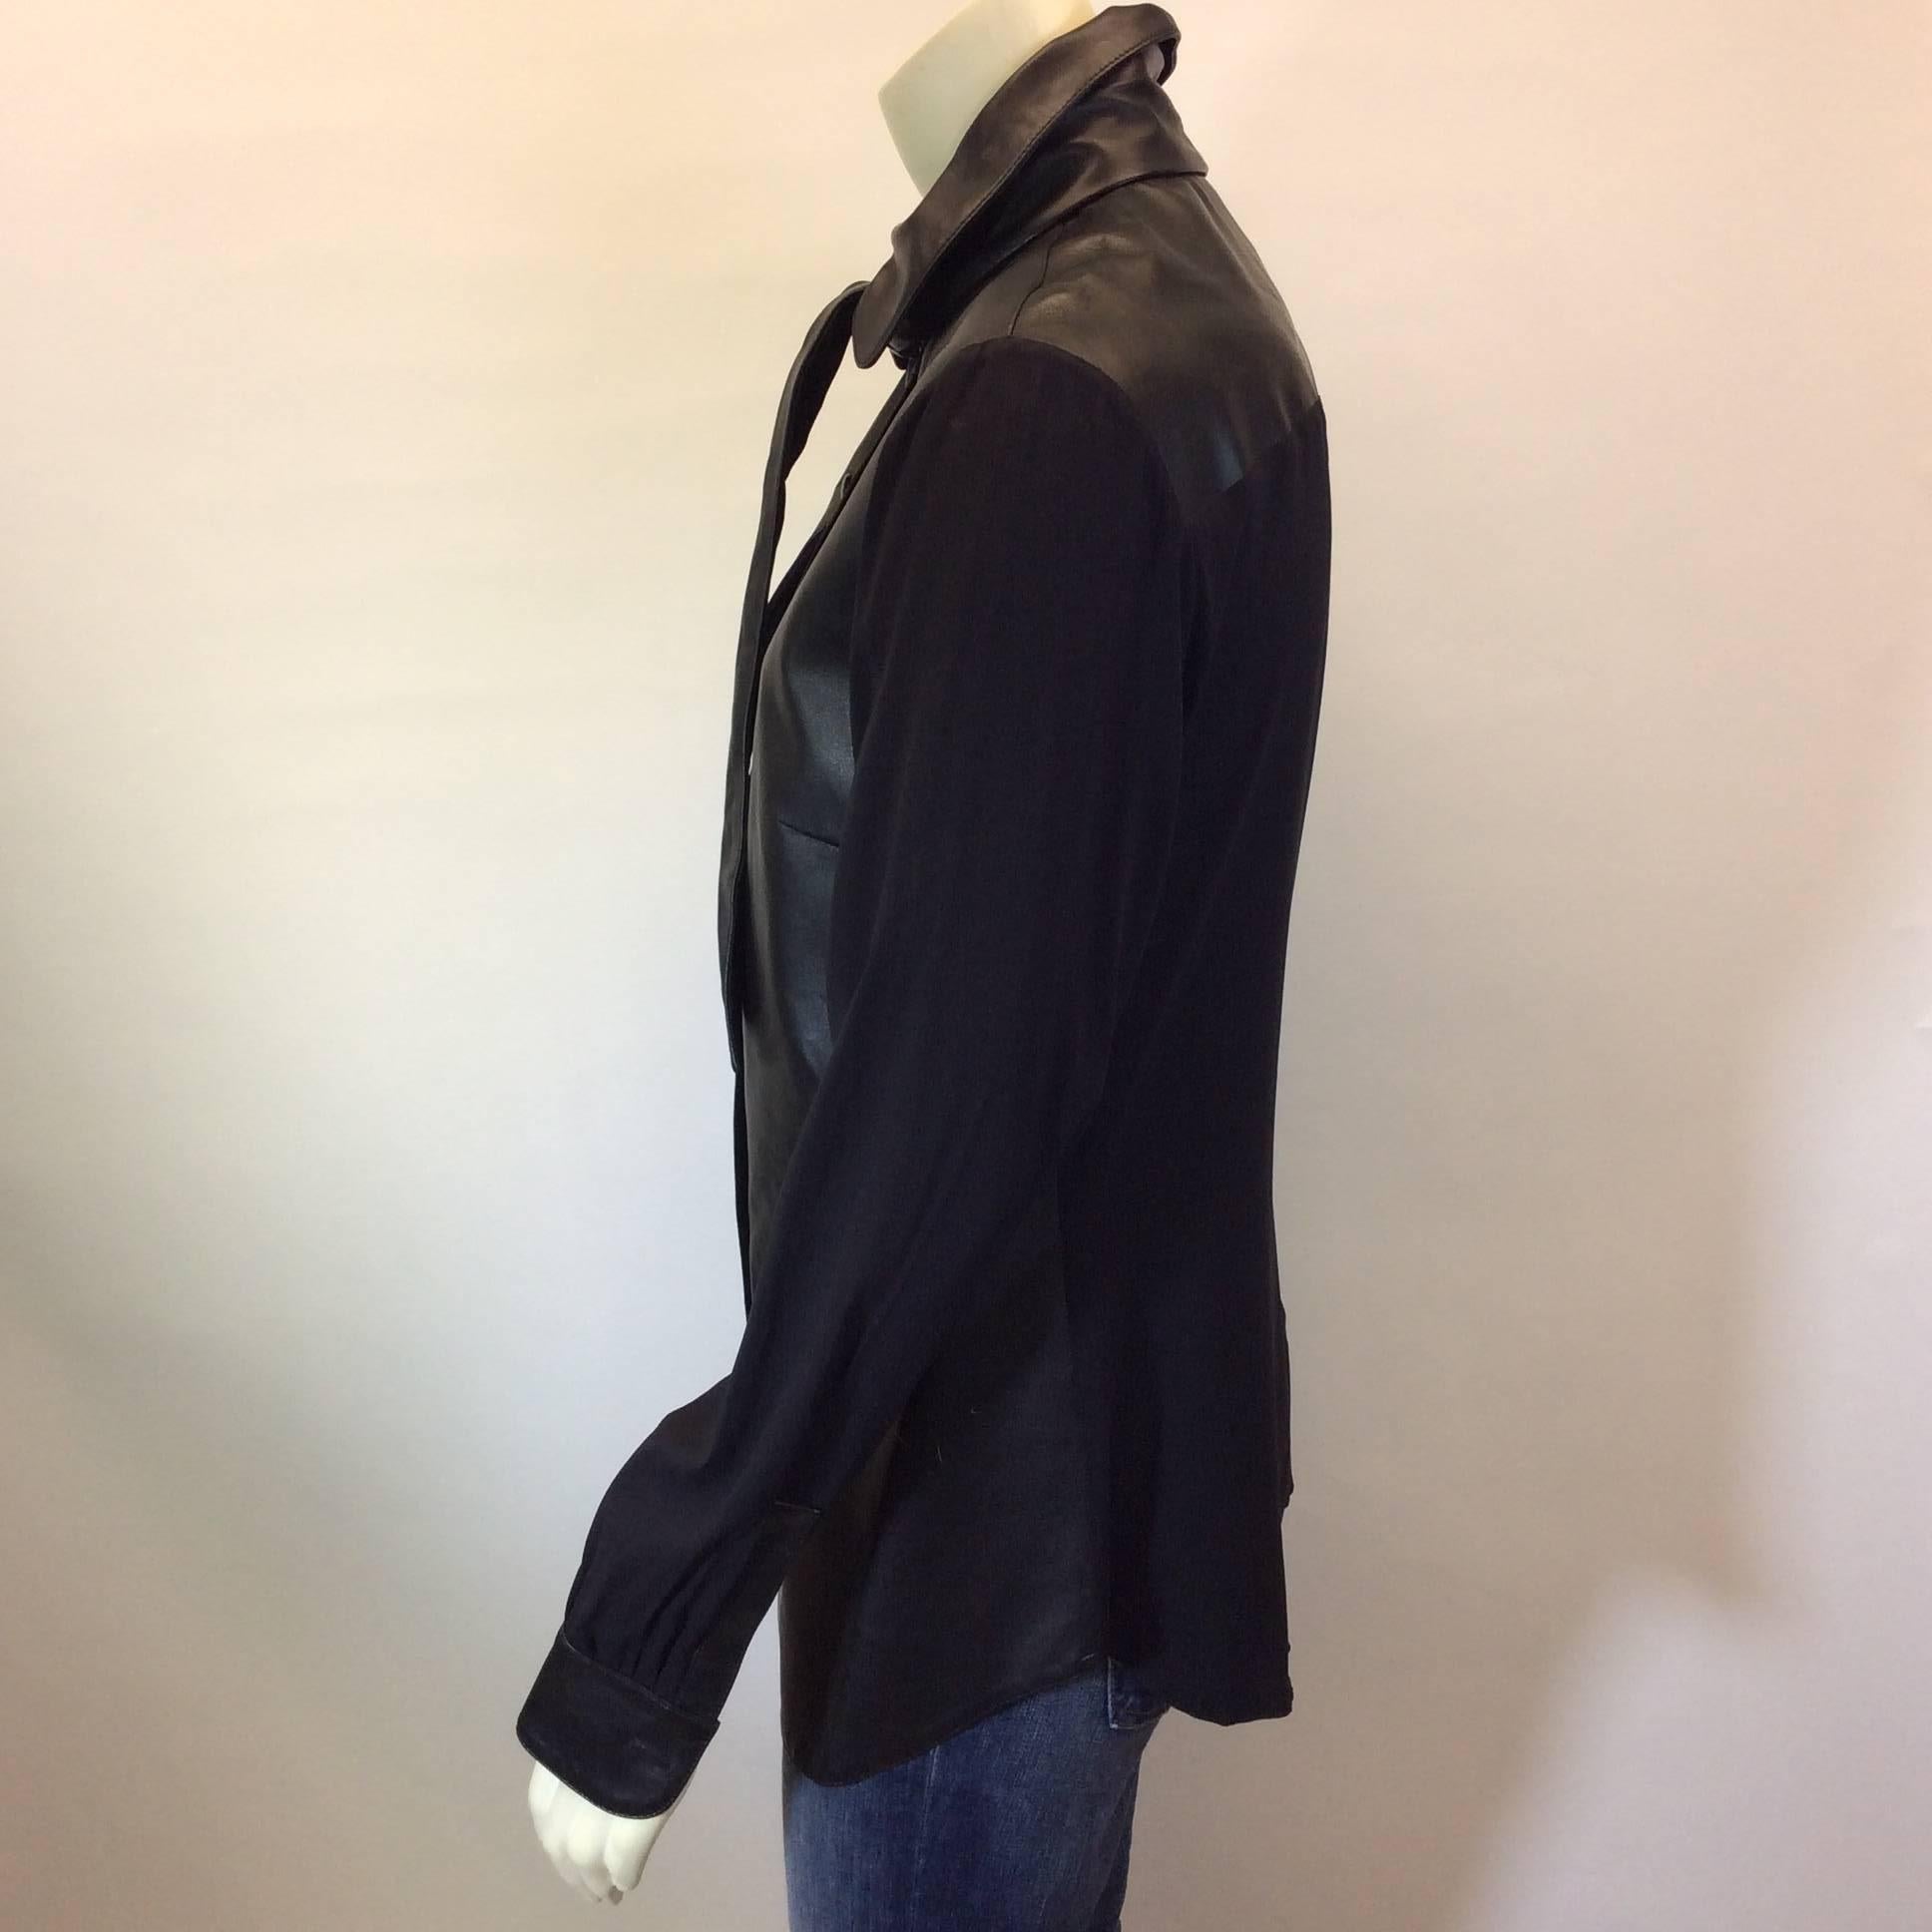 Black Leather Blouse with Neck Tie
Size 42 (equates to US 10)
100% Leather, 94% Silk, 6% Spandex